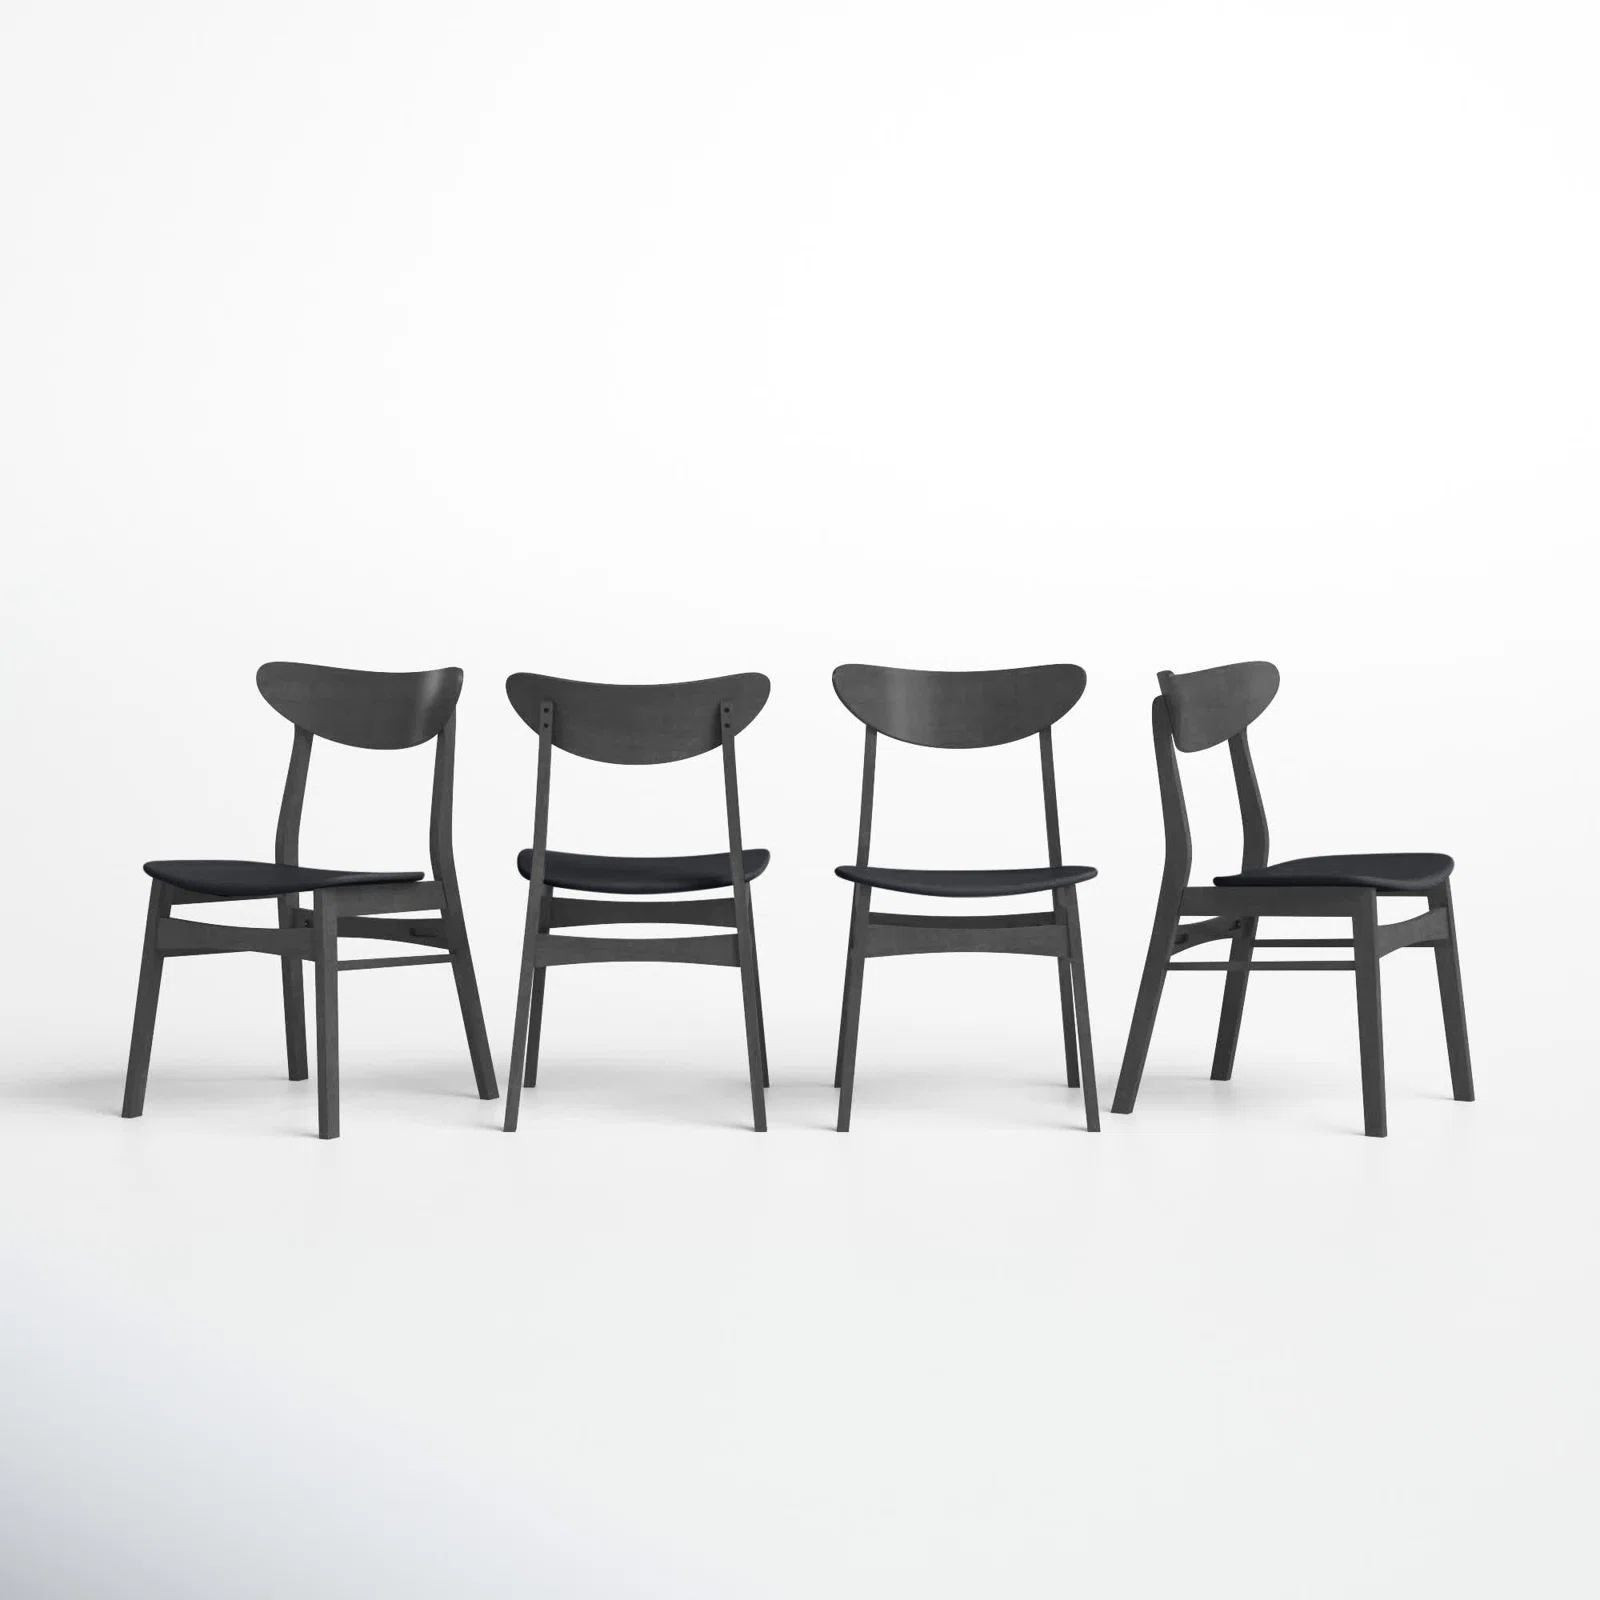 Clement Kruse Upholstered Side Chair (Set of 4) | Wayfair North America